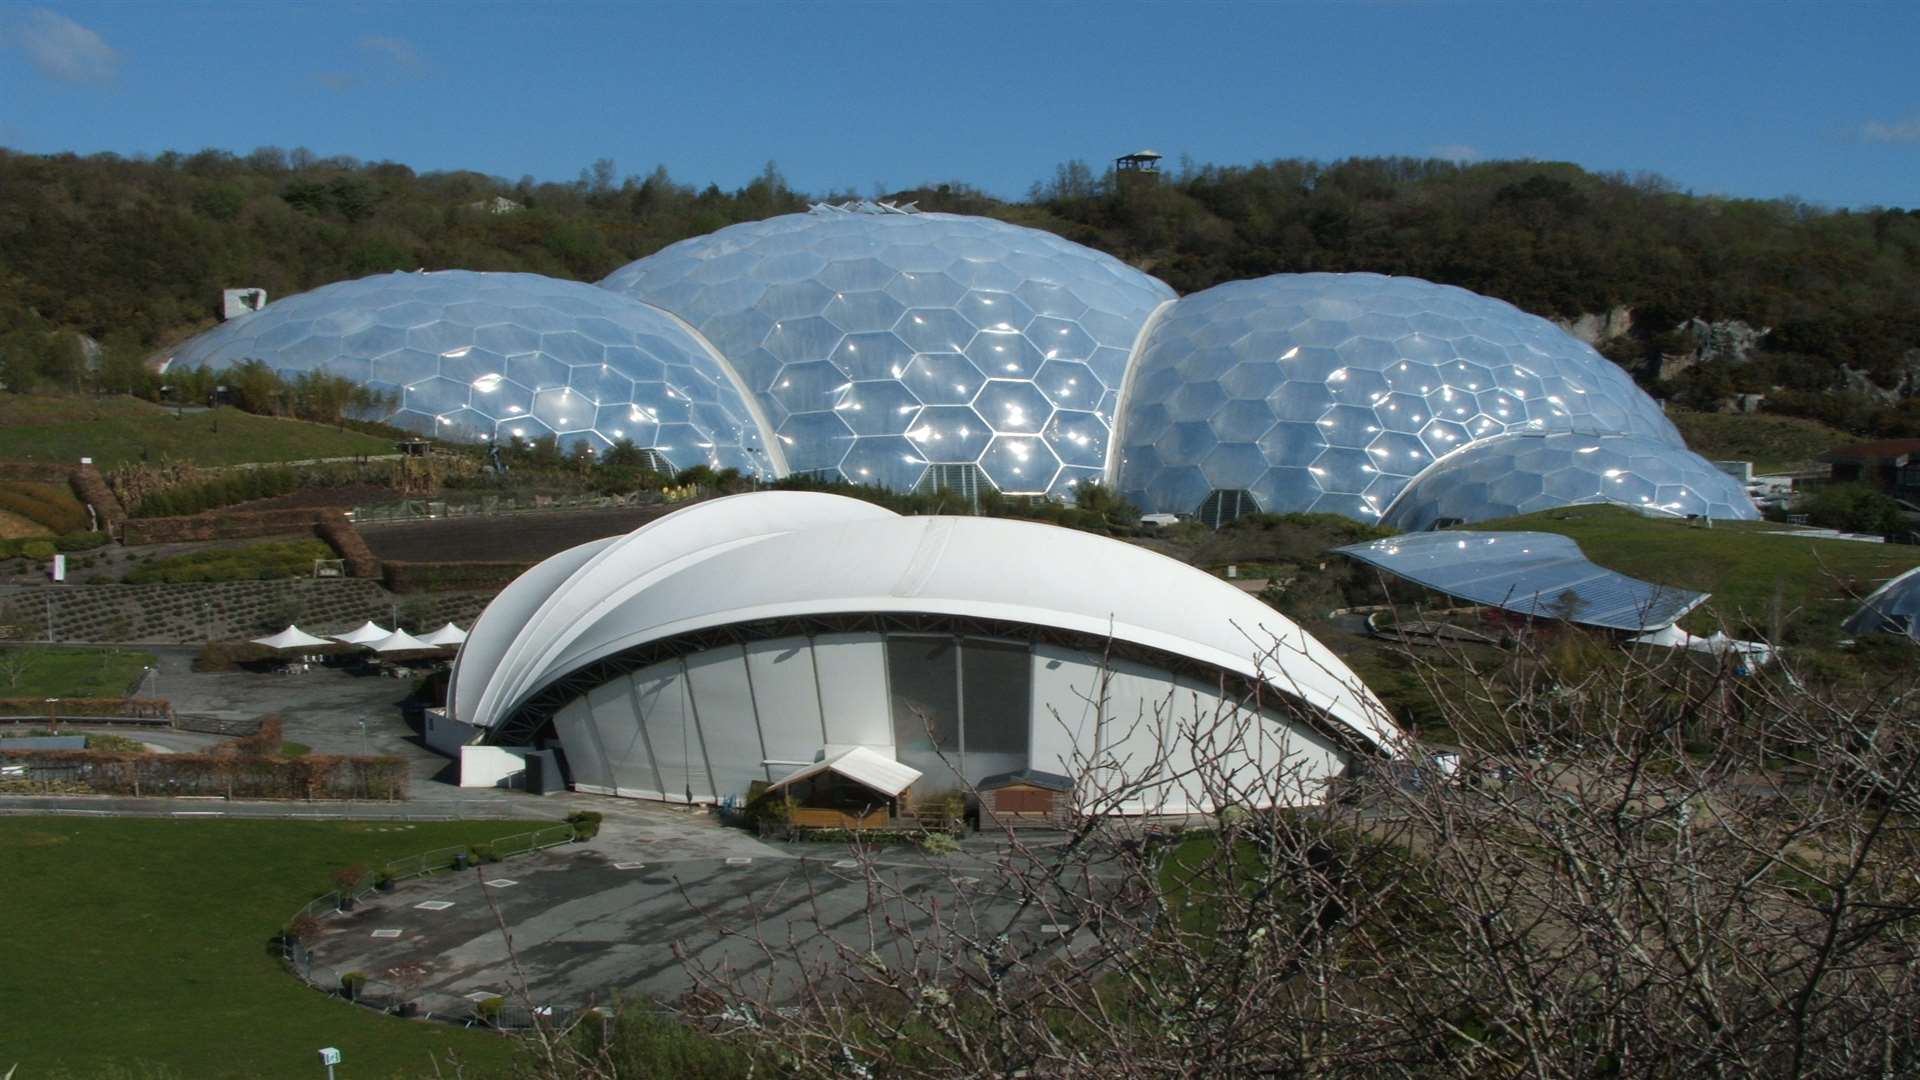 The bio domes at the Eden Project